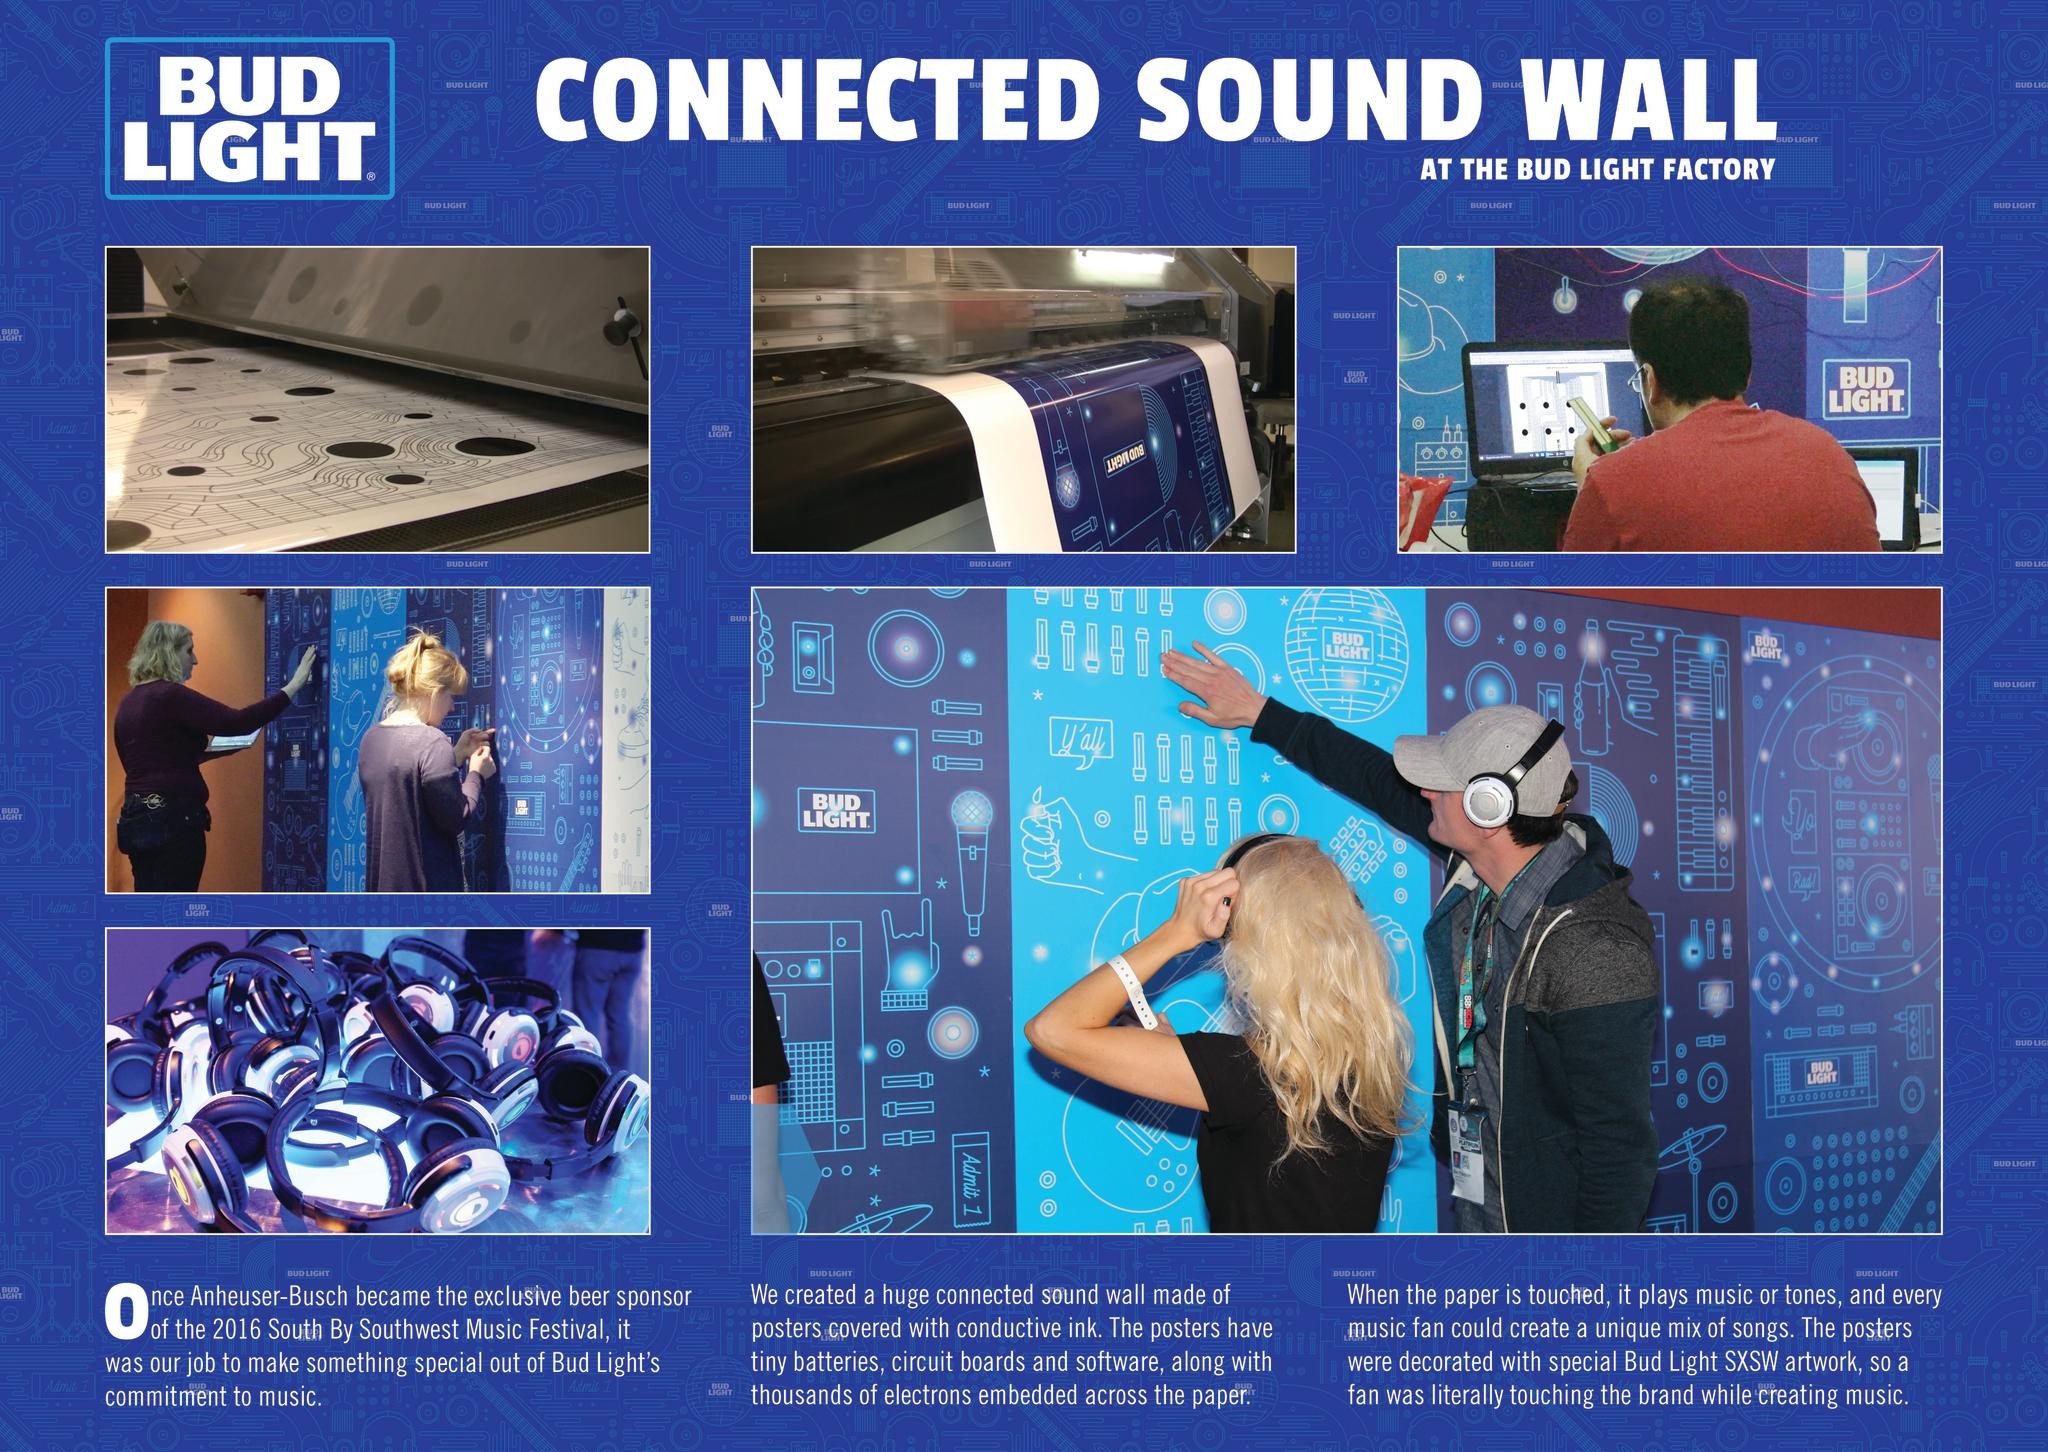 Connected Sound Wall